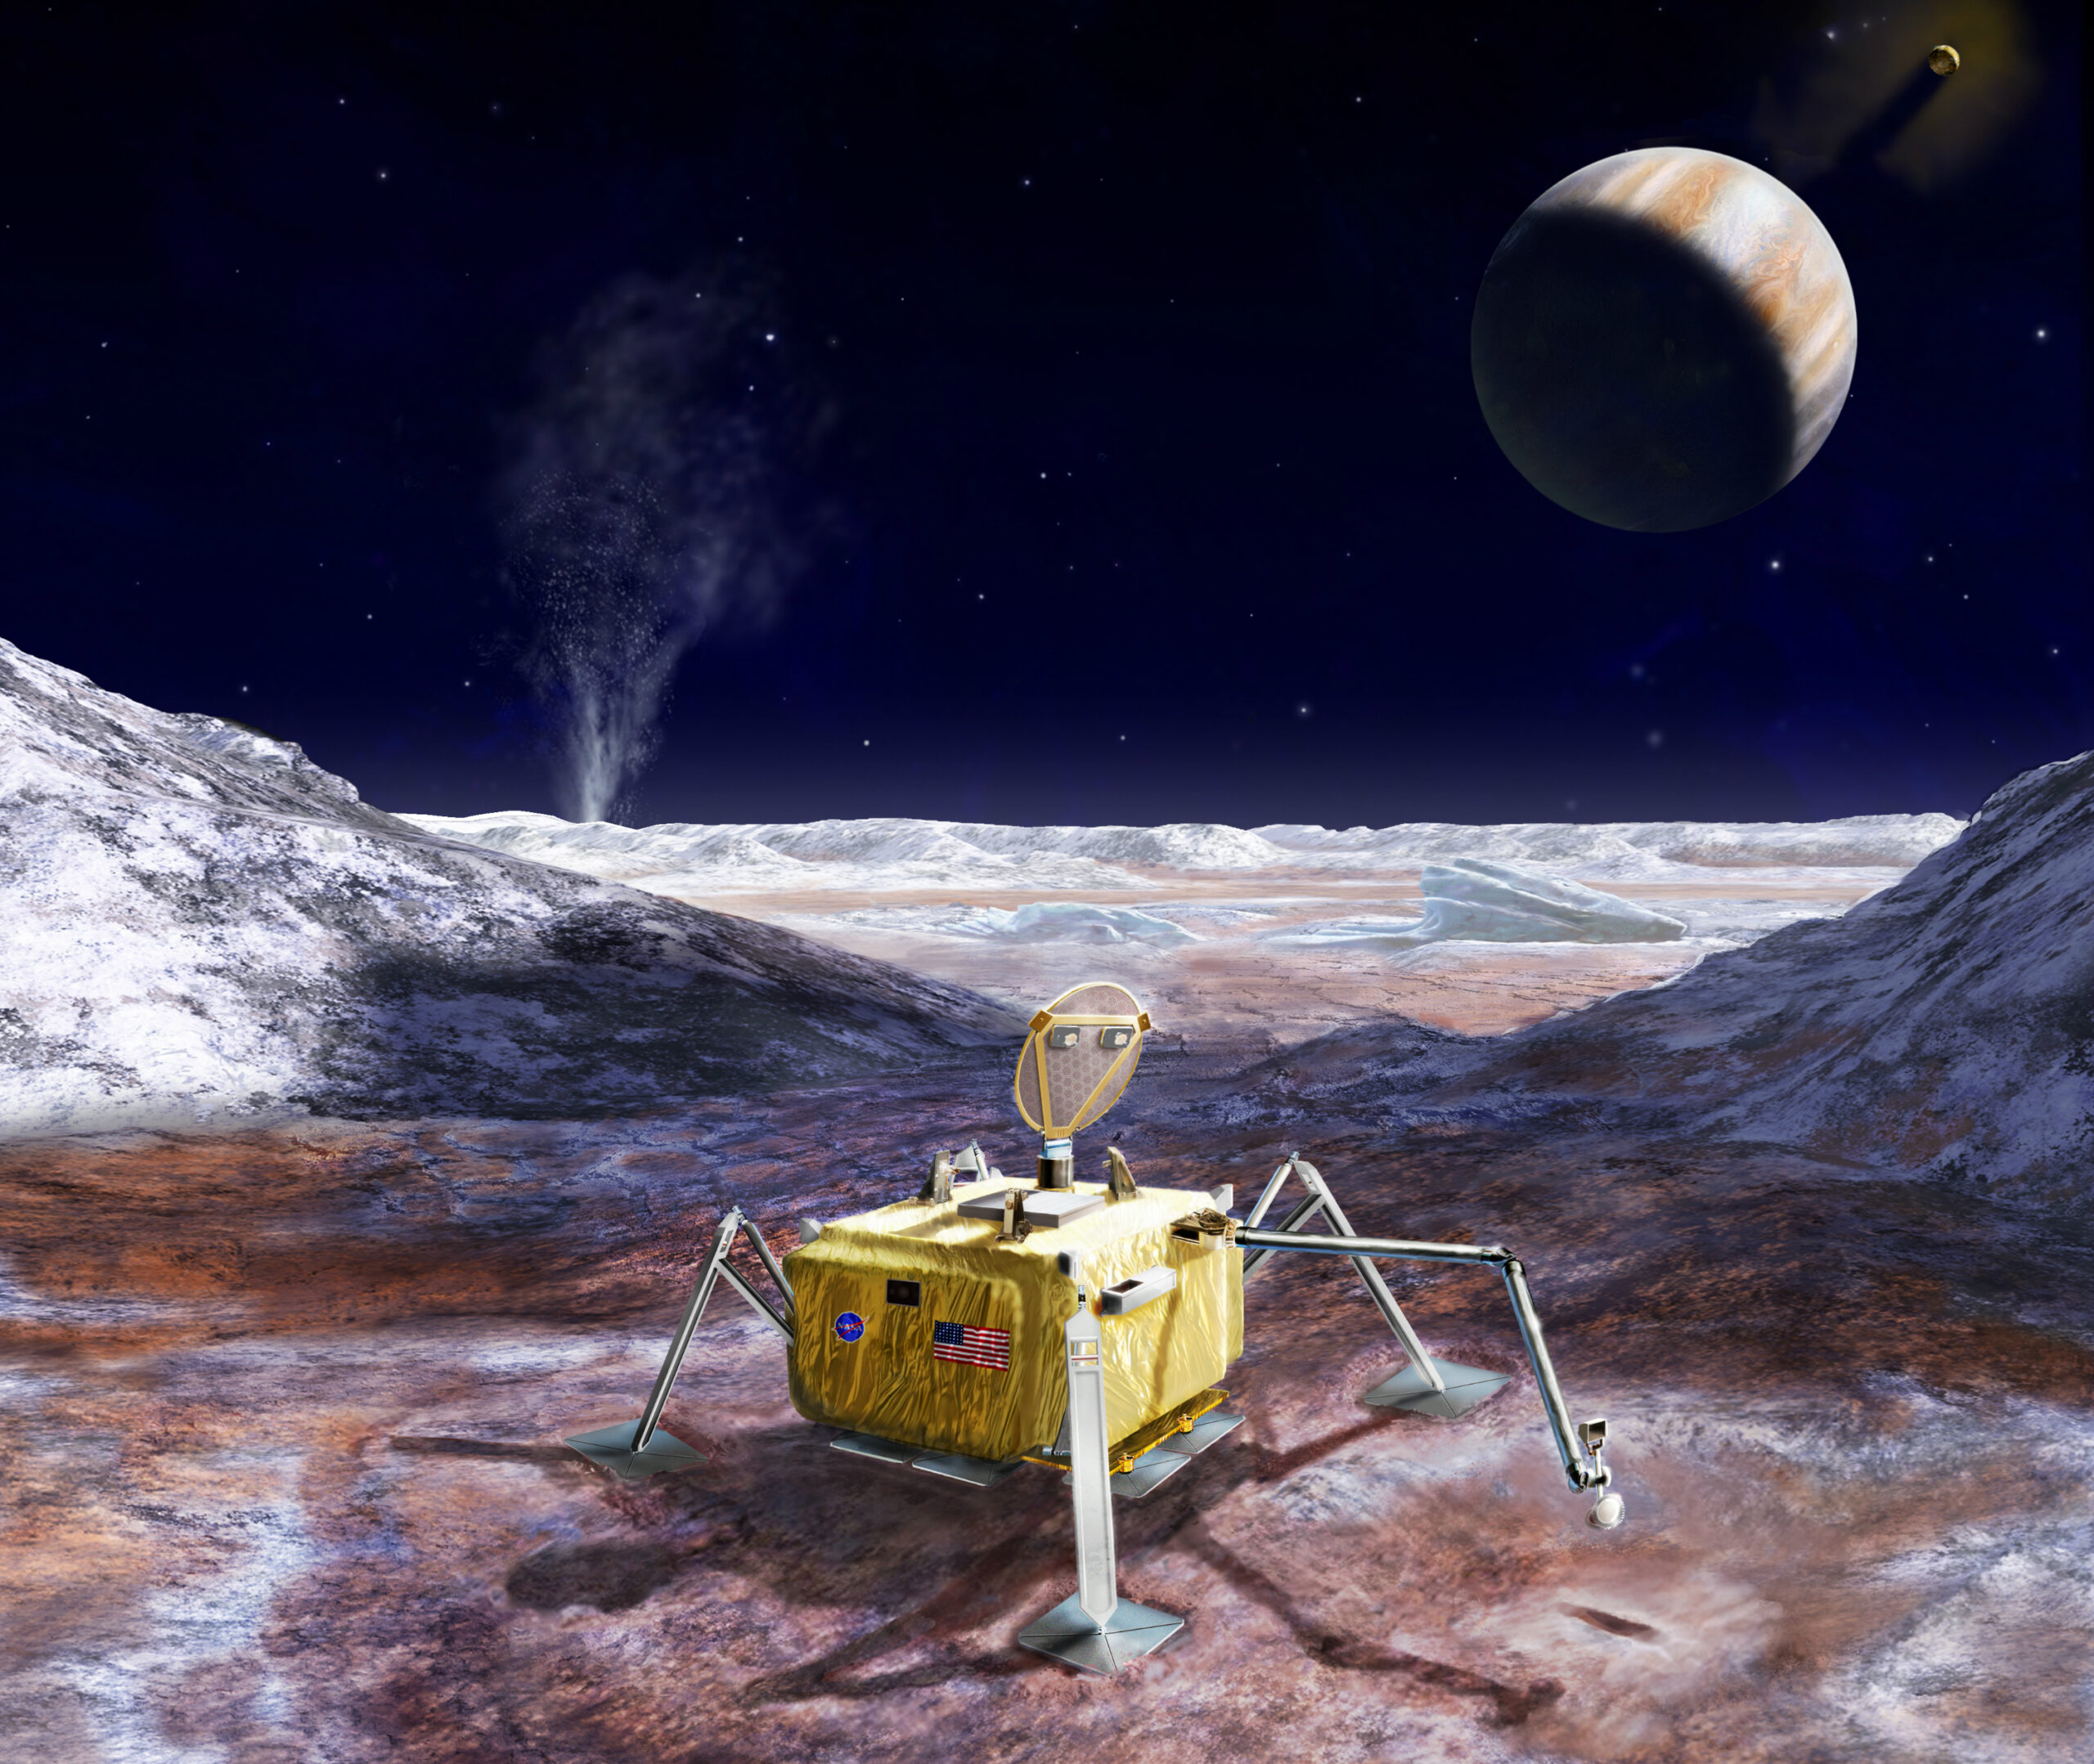 Here’s what NASA’s Europa lander could look like